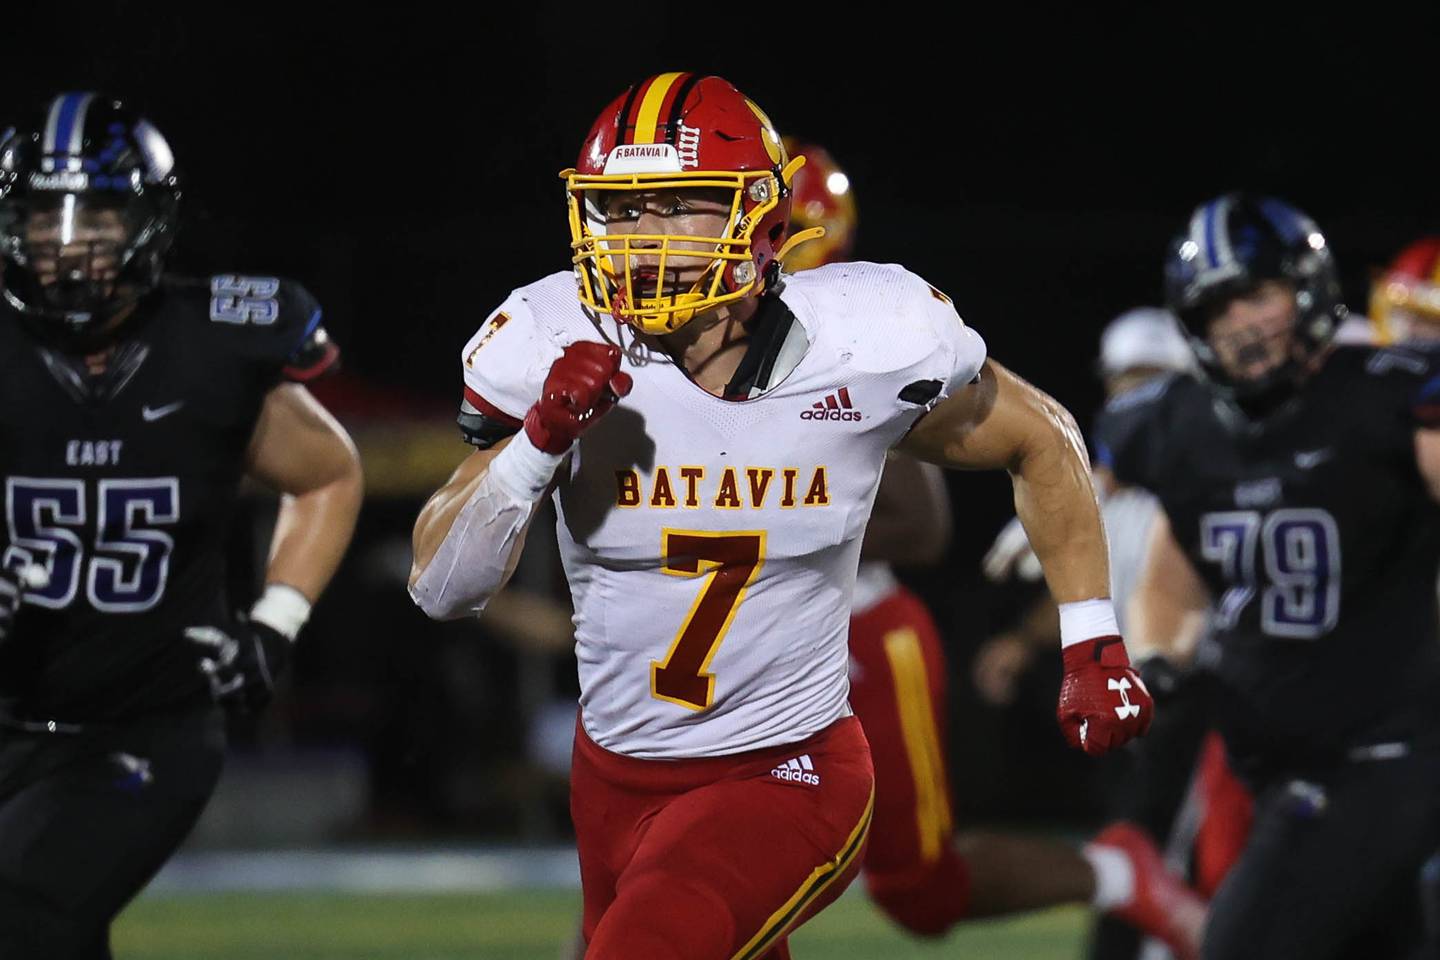 Batavia’s Tyler Jansey looks to make a play against Lincoln-Way East. Friday, Sept. 2, 2022, in Frankfort.